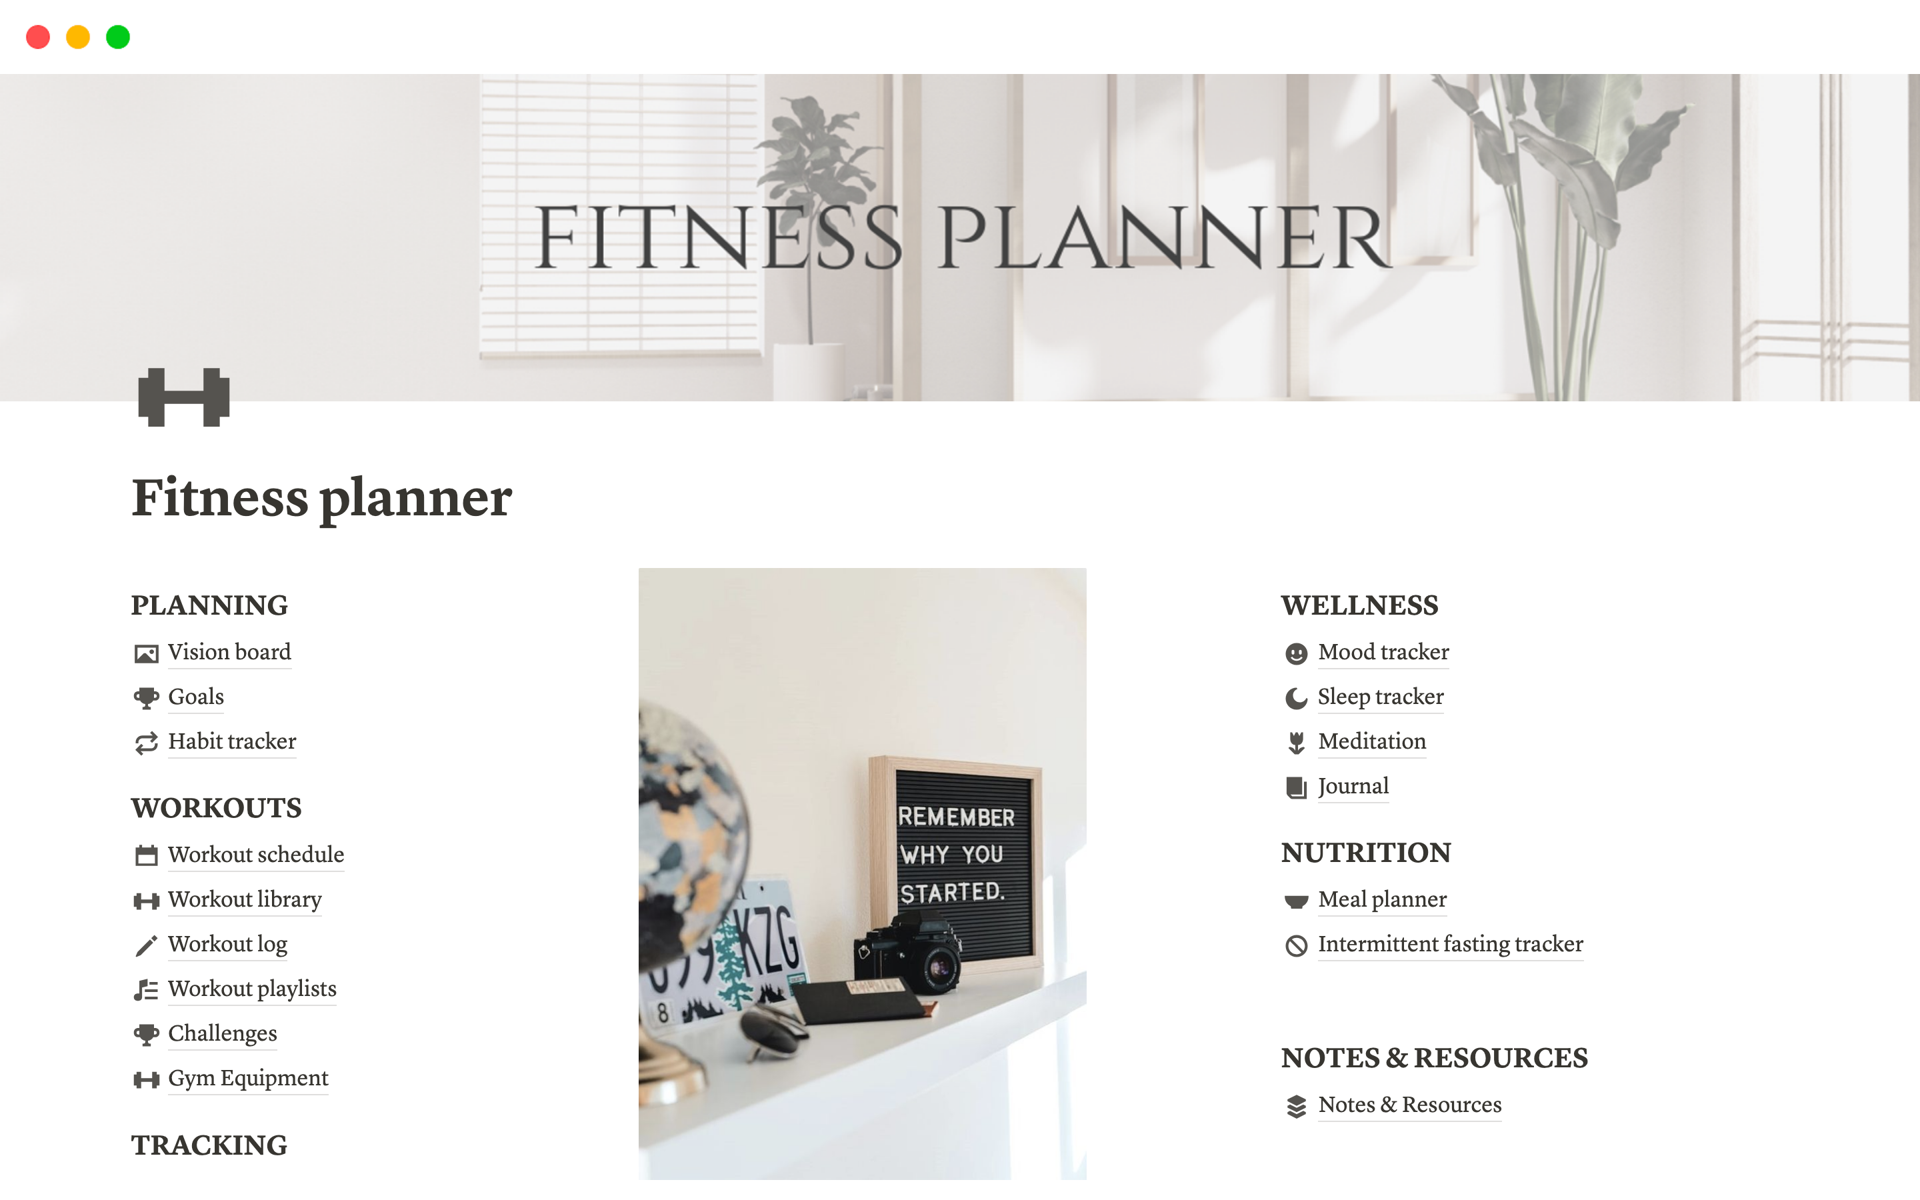 This fitness planner will help you plan your workouts and build programs, track your progress and take care of yourself.